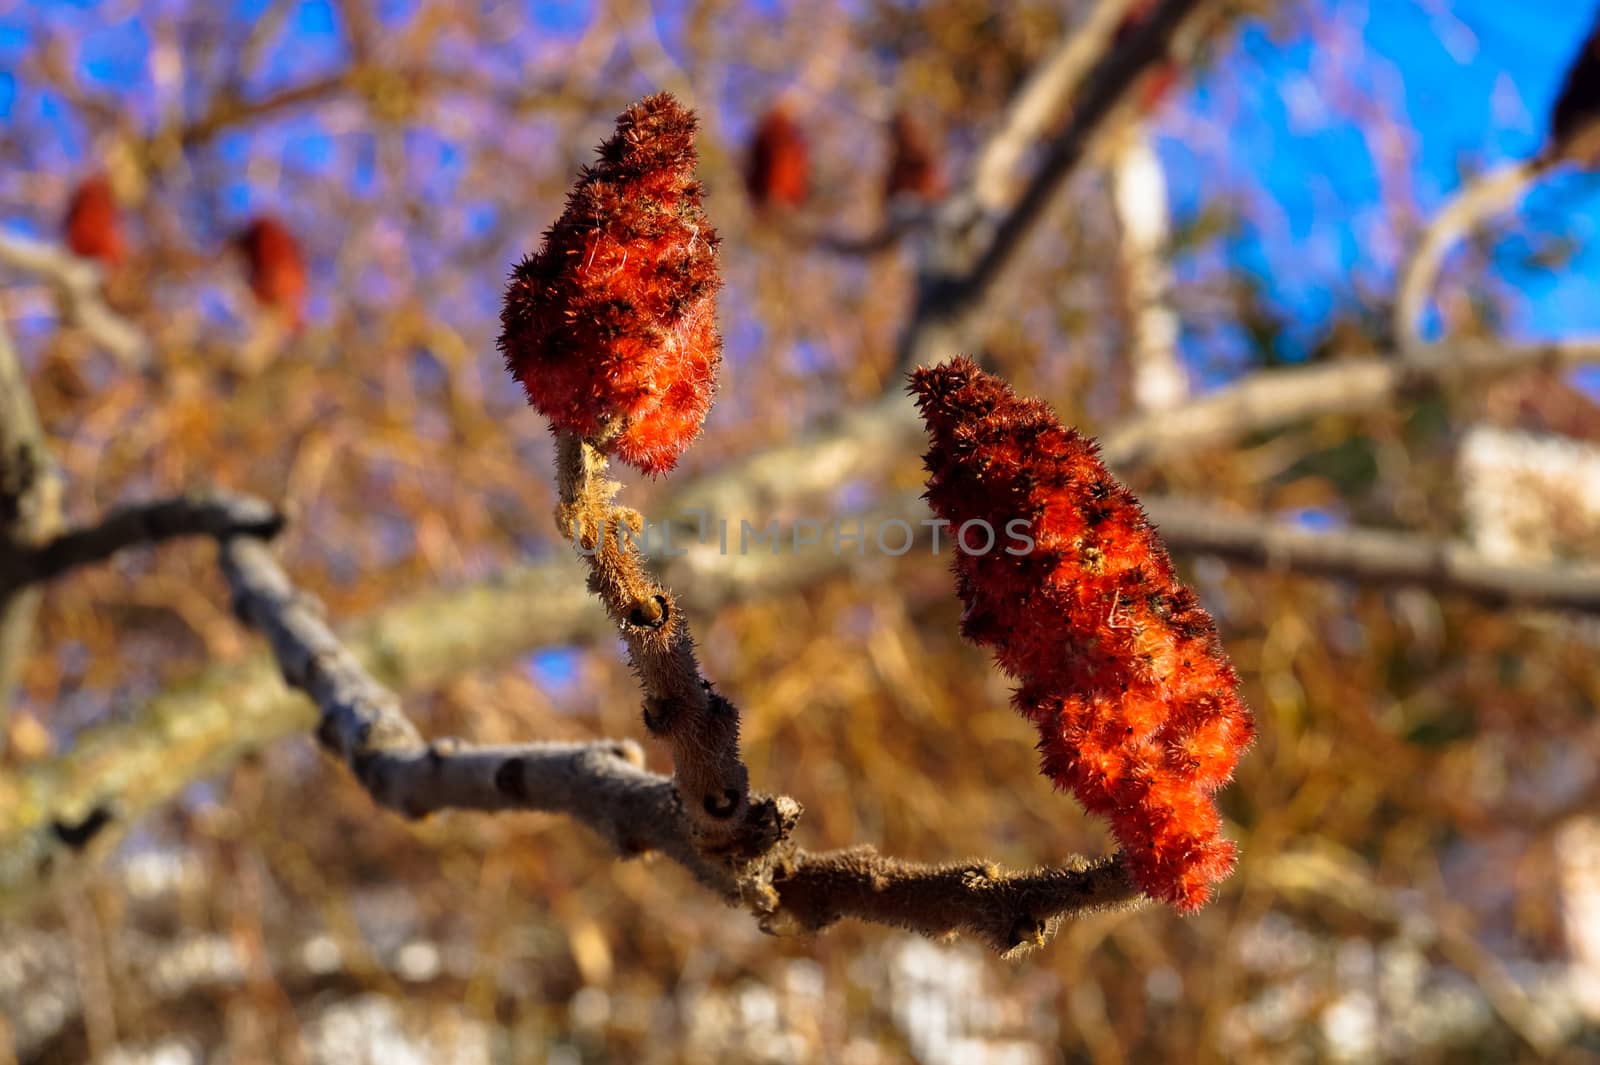 amazing fluffy red flower on a tree branch by Oleczka11